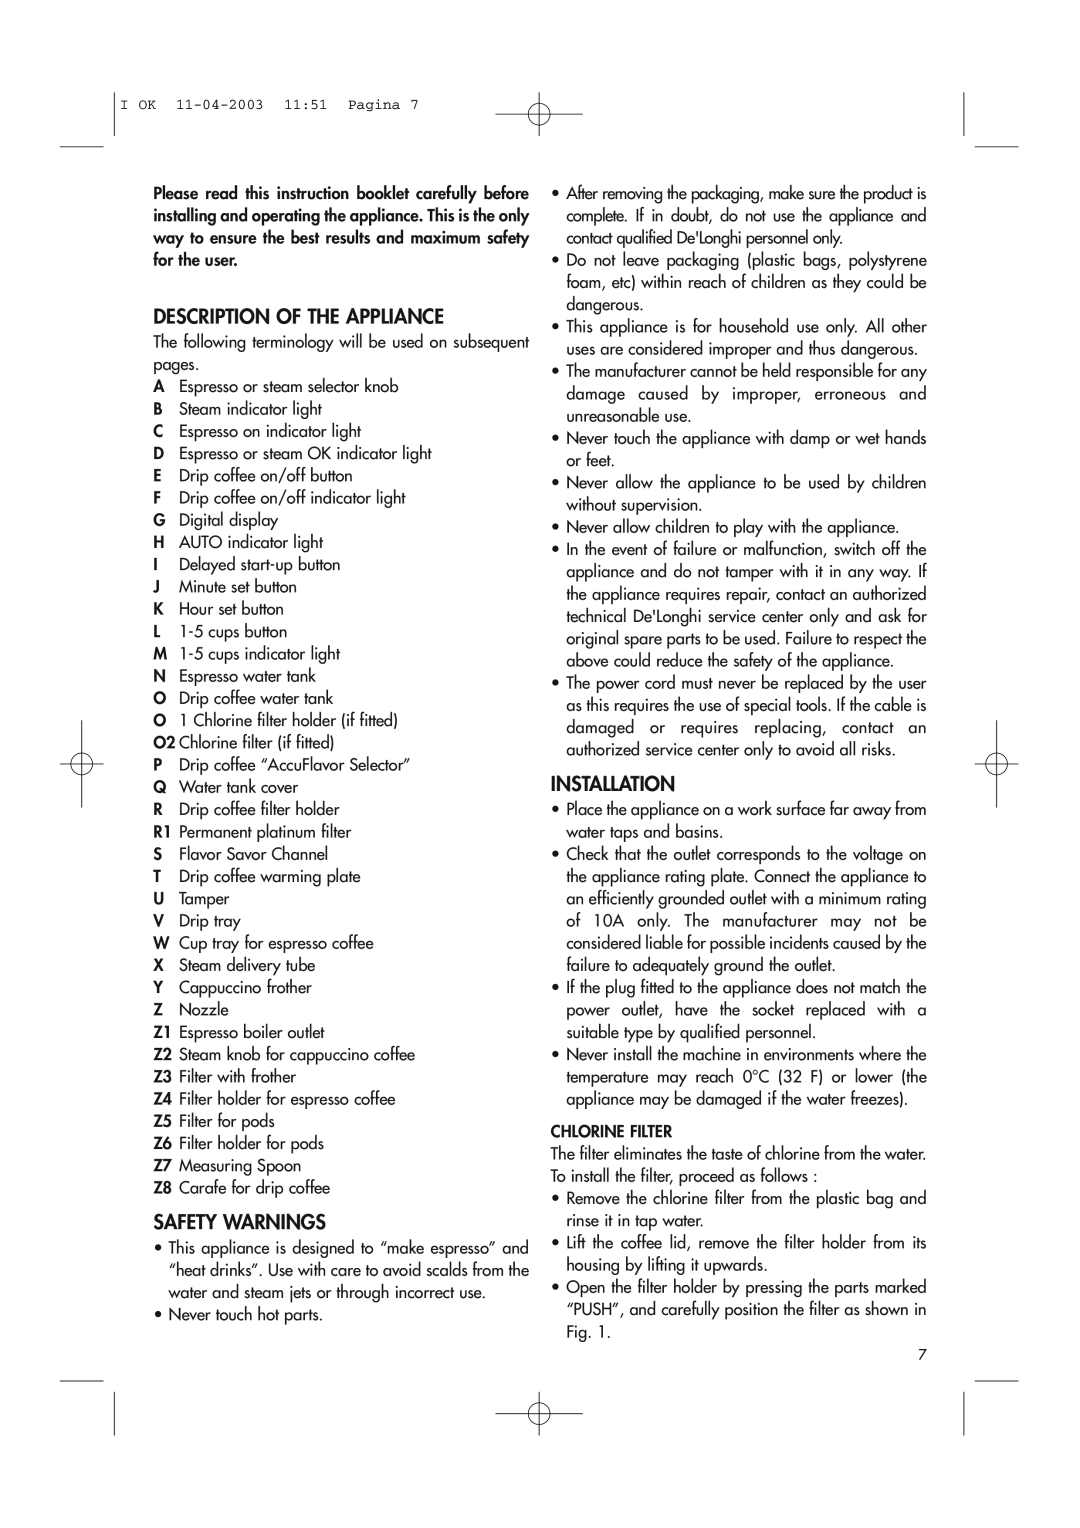 DeLonghi BCO264B manual Description Of The Appliance, Safety Warnings, Installation 